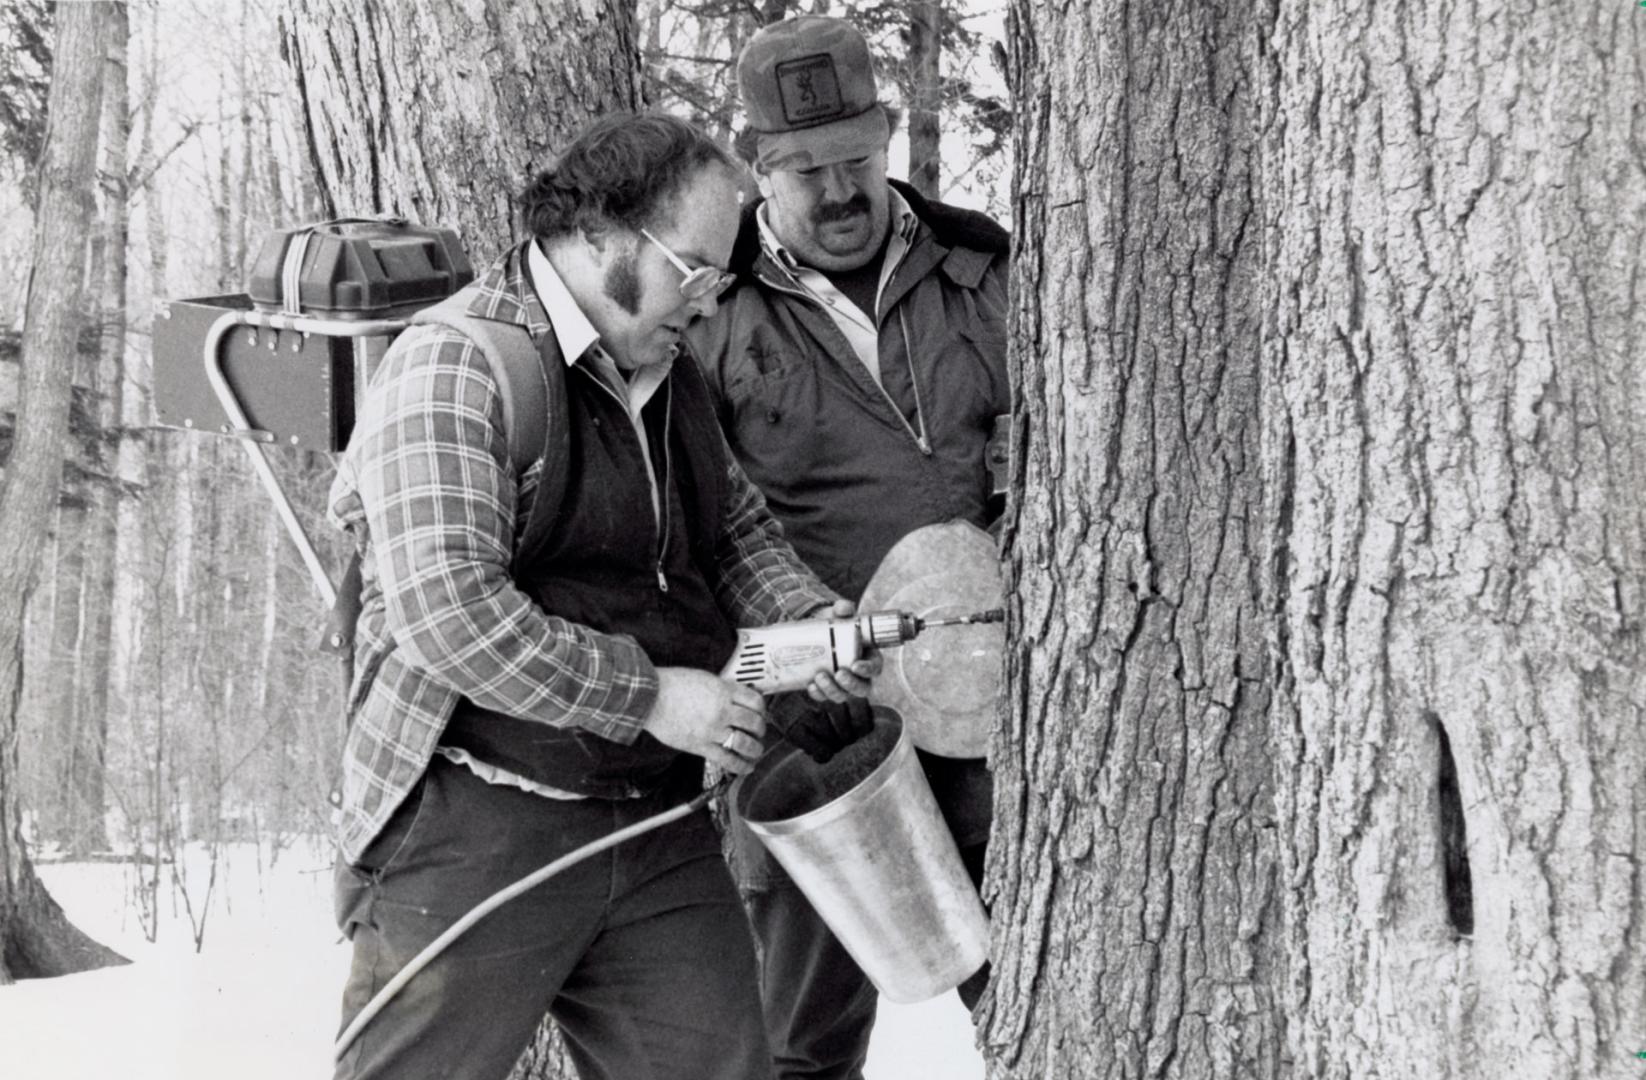 Brian Crozier drills to tap sap while coworker Grant Moravek watches. Bruce's Mill Conservation Area, Ontario